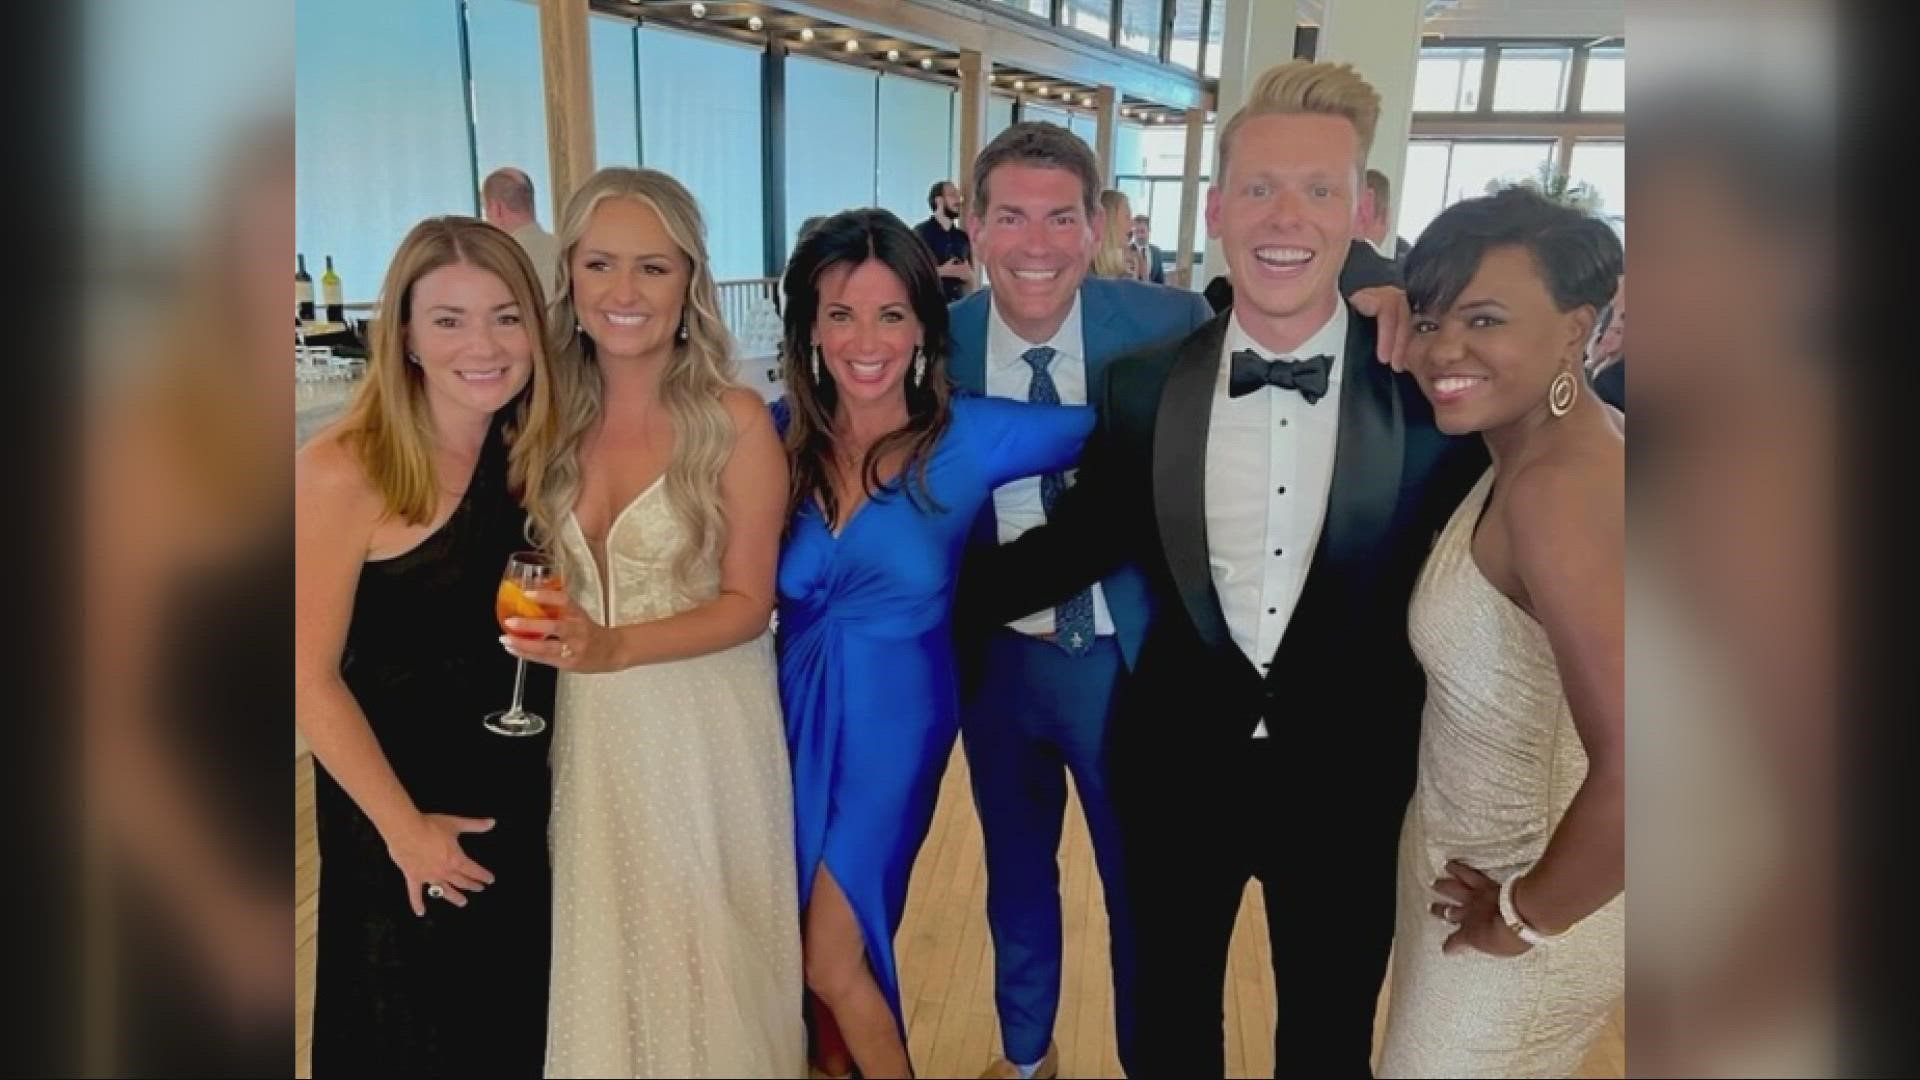 3News' Austin Love tied the knot yesterday! Congratulations Austin and Allison!